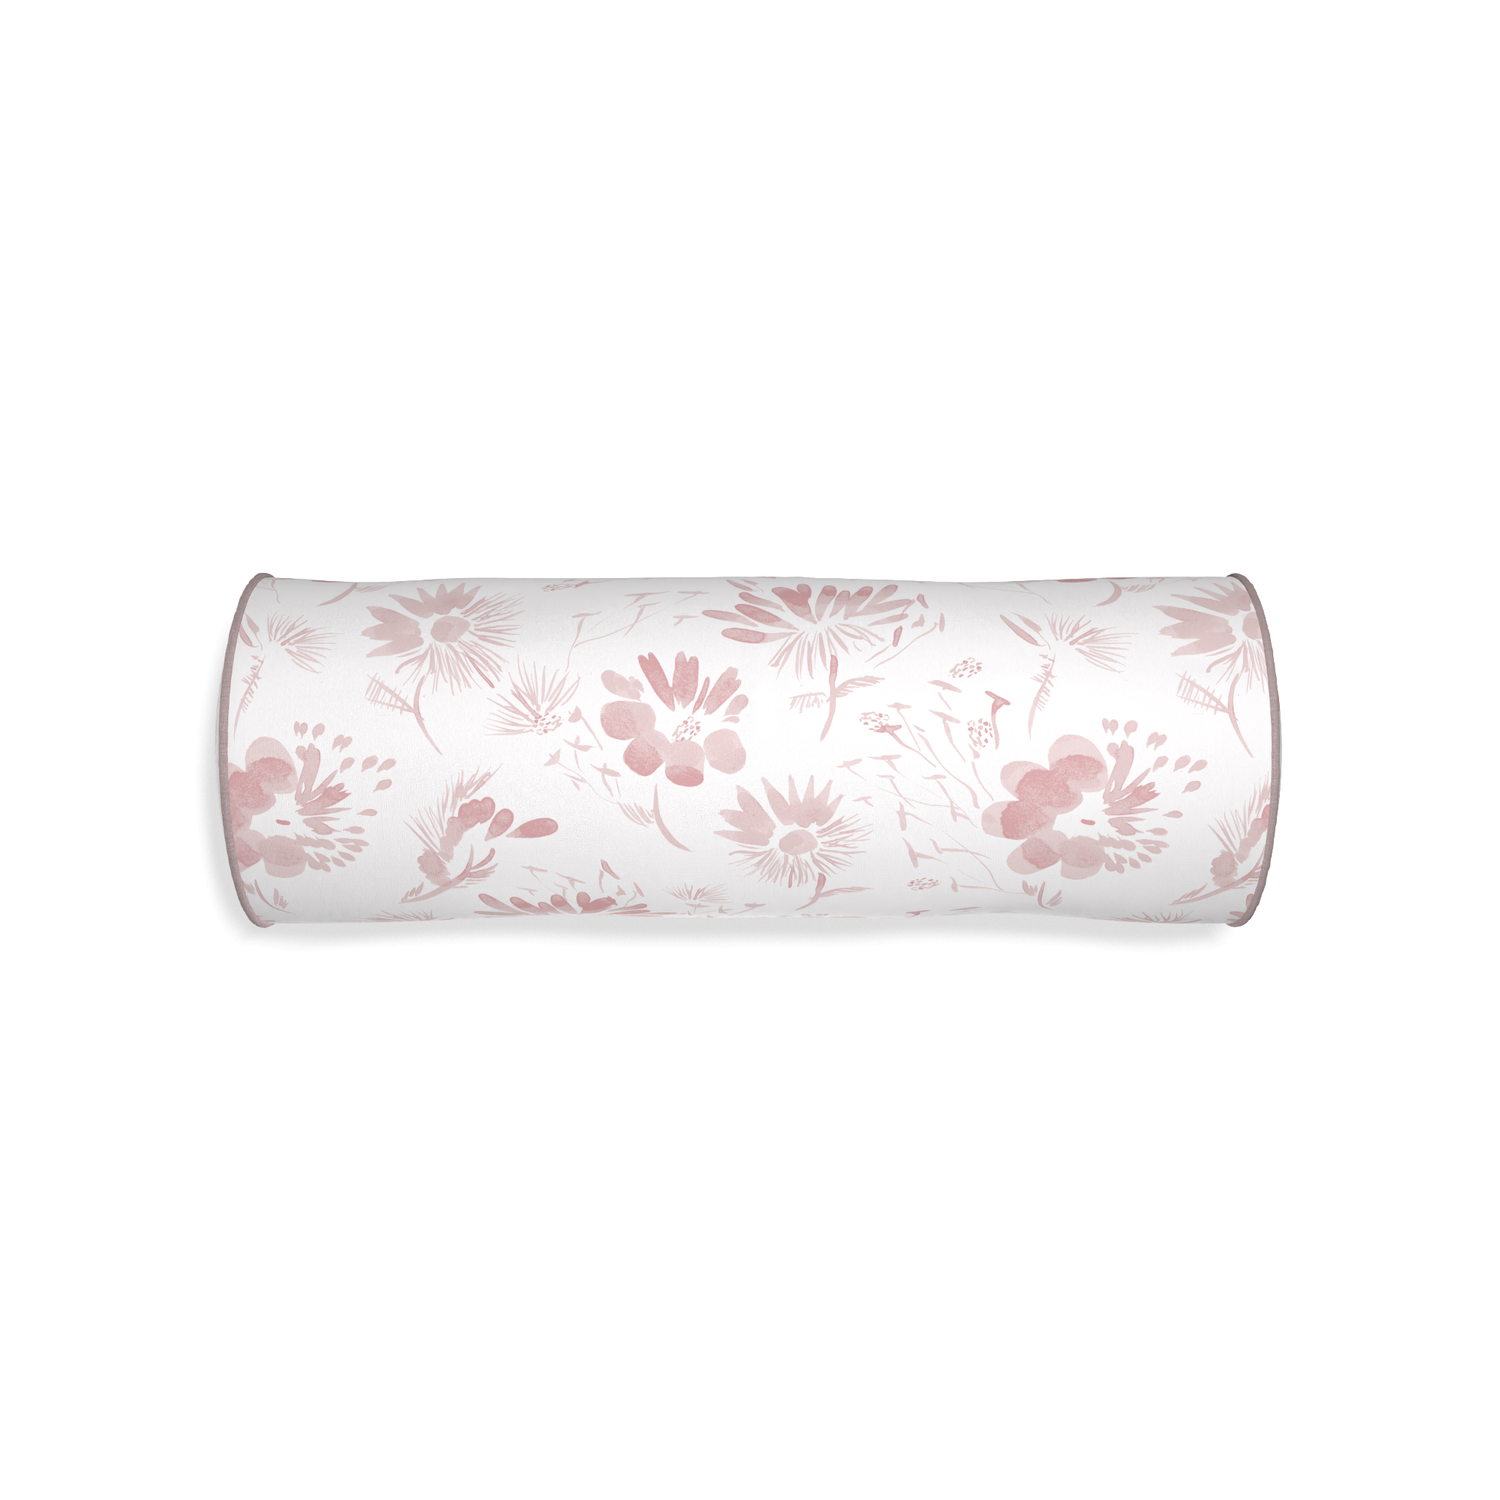 Bolster blake custom pink floralpillow with orchid piping on white background